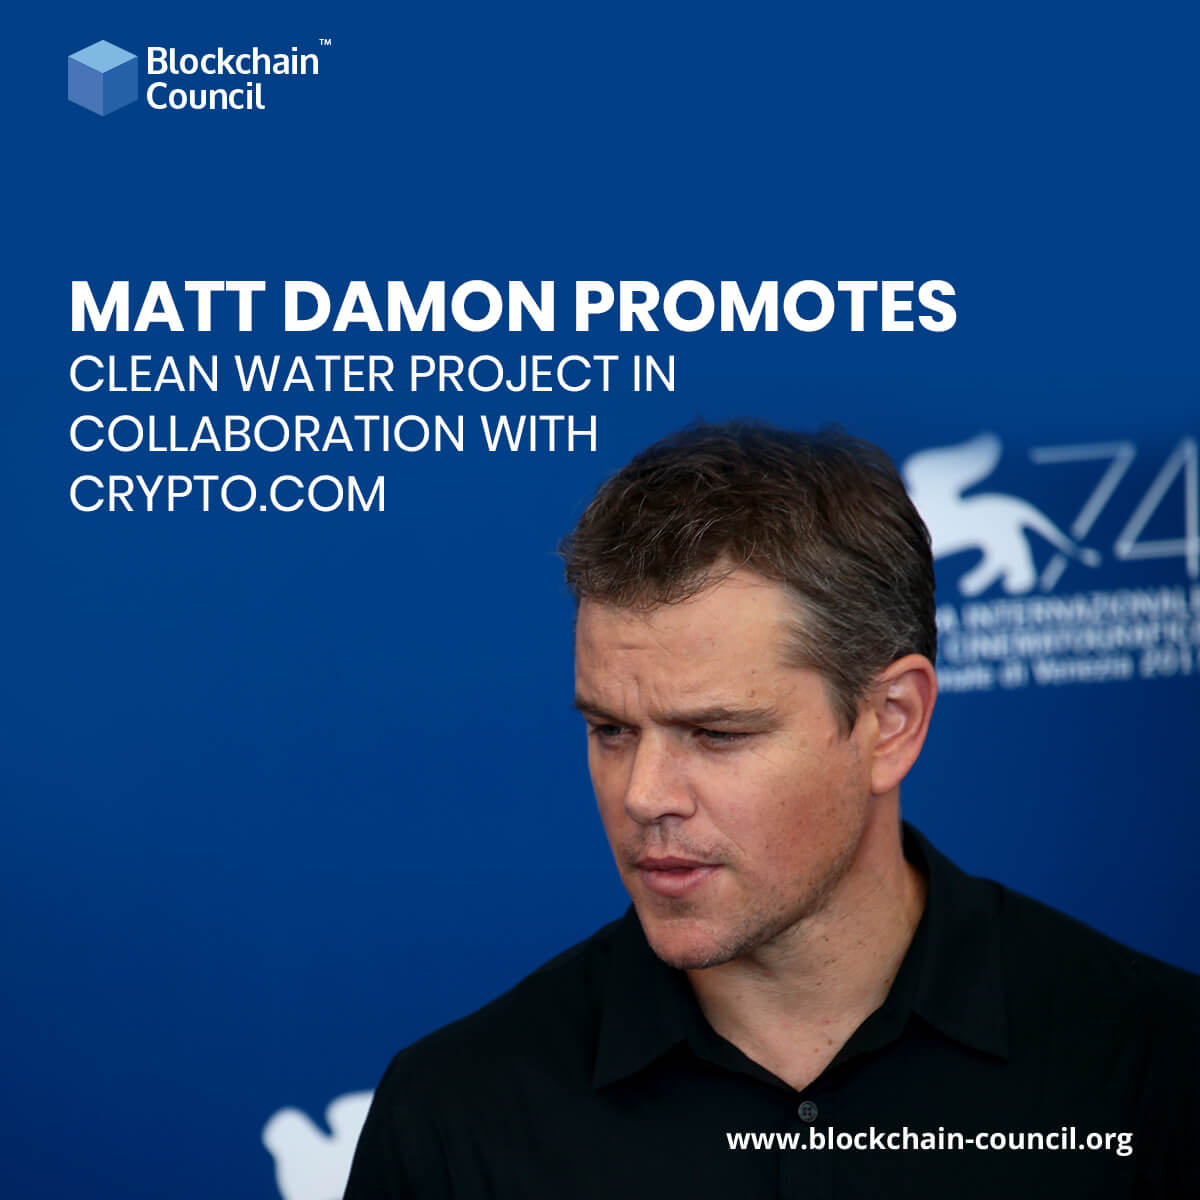 Matt Damon promotes clean water project in collaboration with Crypto